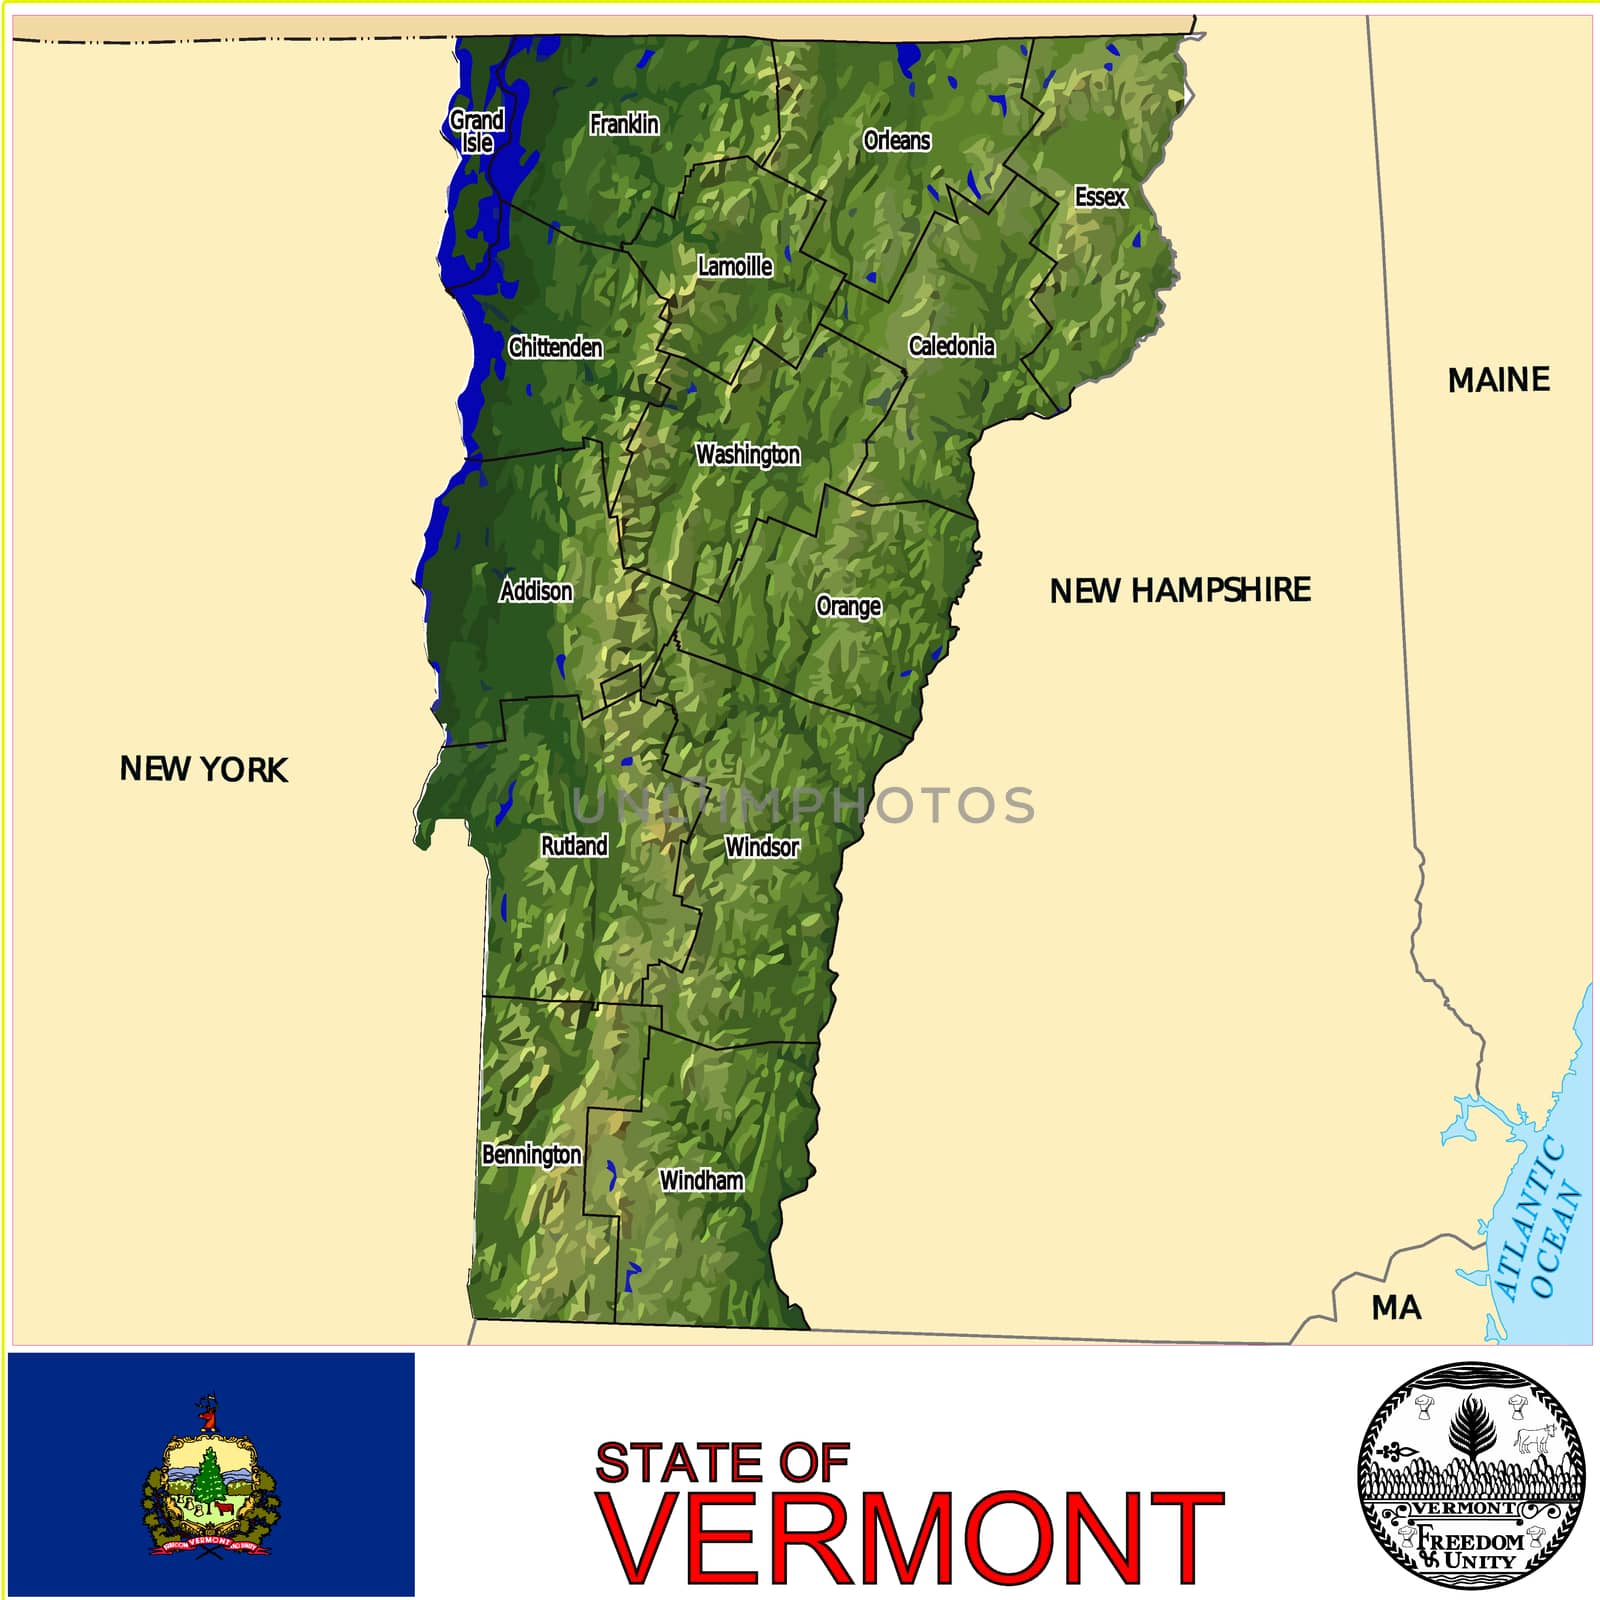 Vermont Counties map by JRTBurr